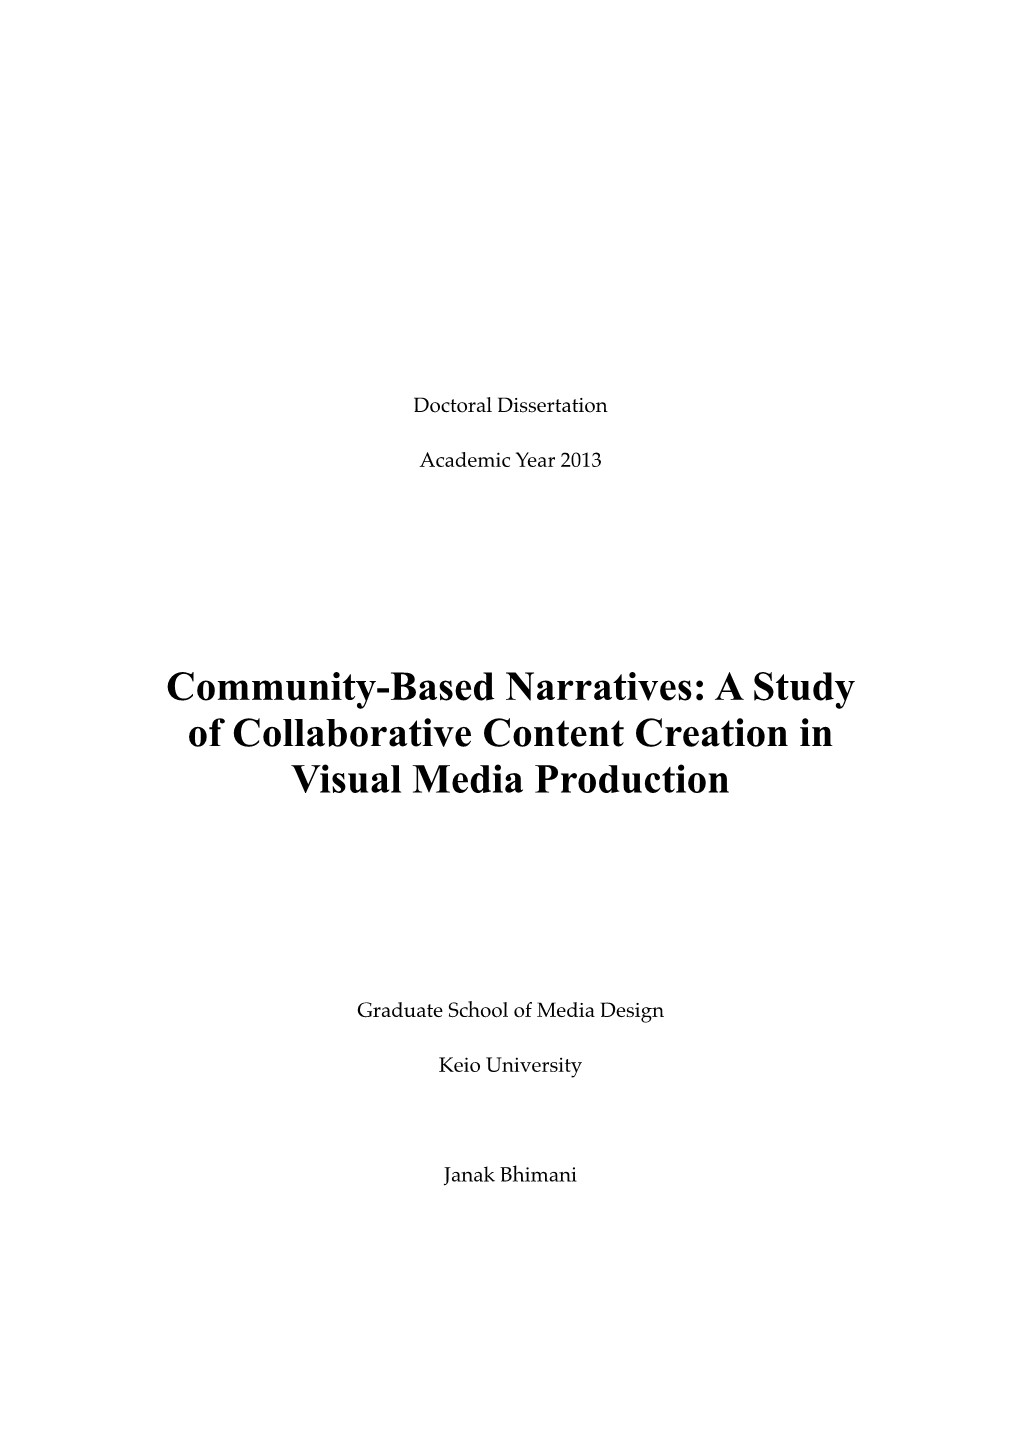 Community-Based Narratives: a Study of Collaborative Content Creation in Visual Media Production